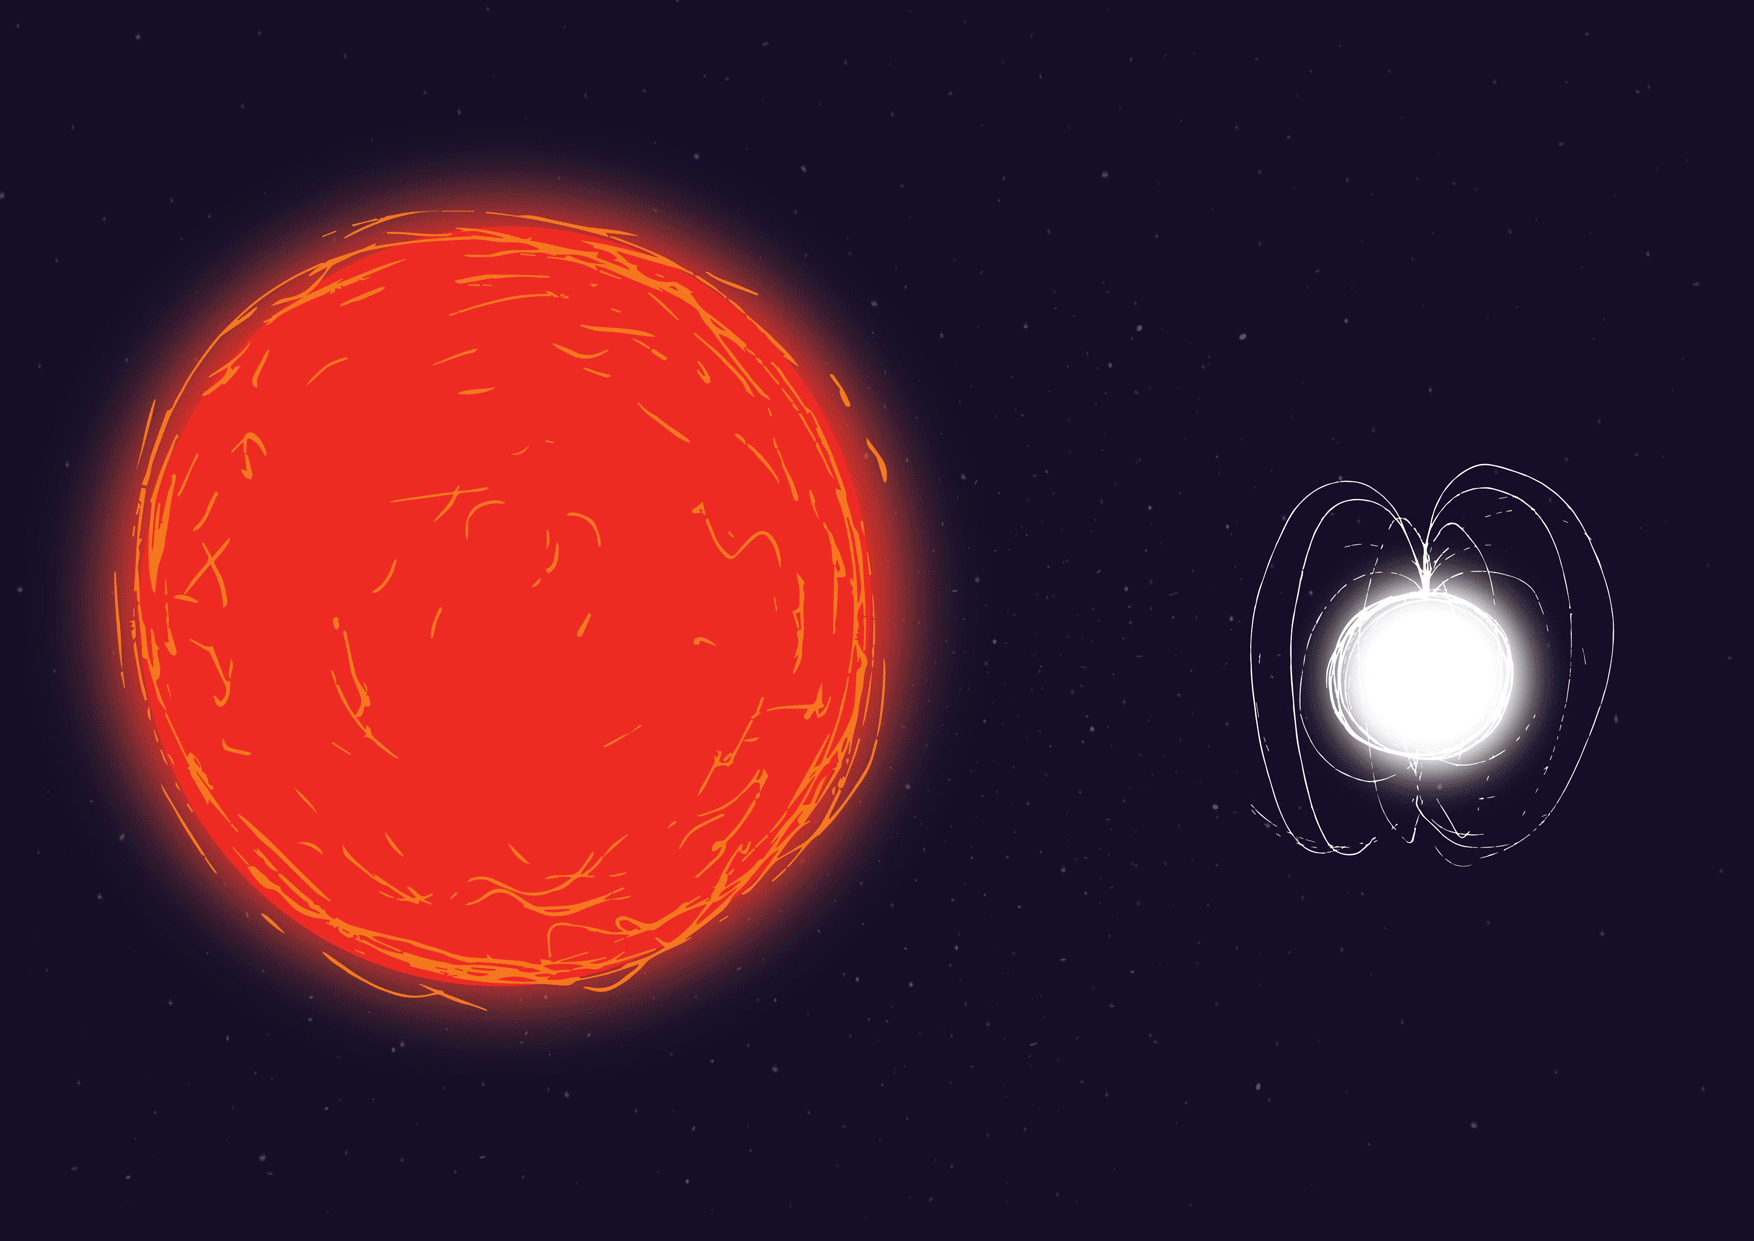 Red giant and neutron star interaction